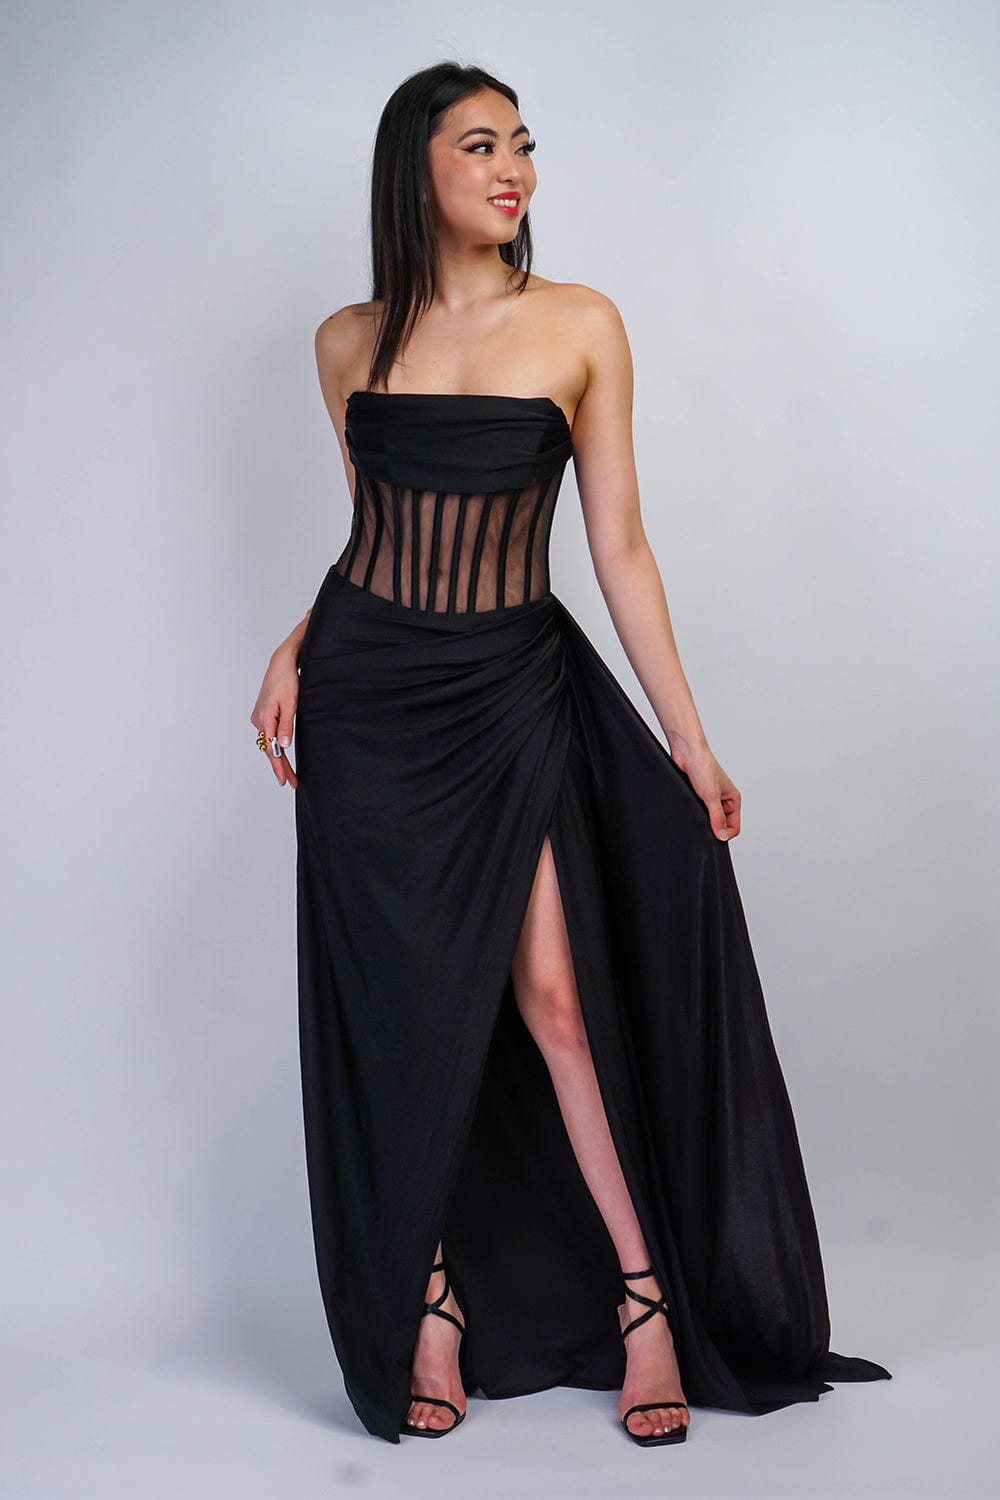 DCD GOWNS Black Strapless Corset Gown